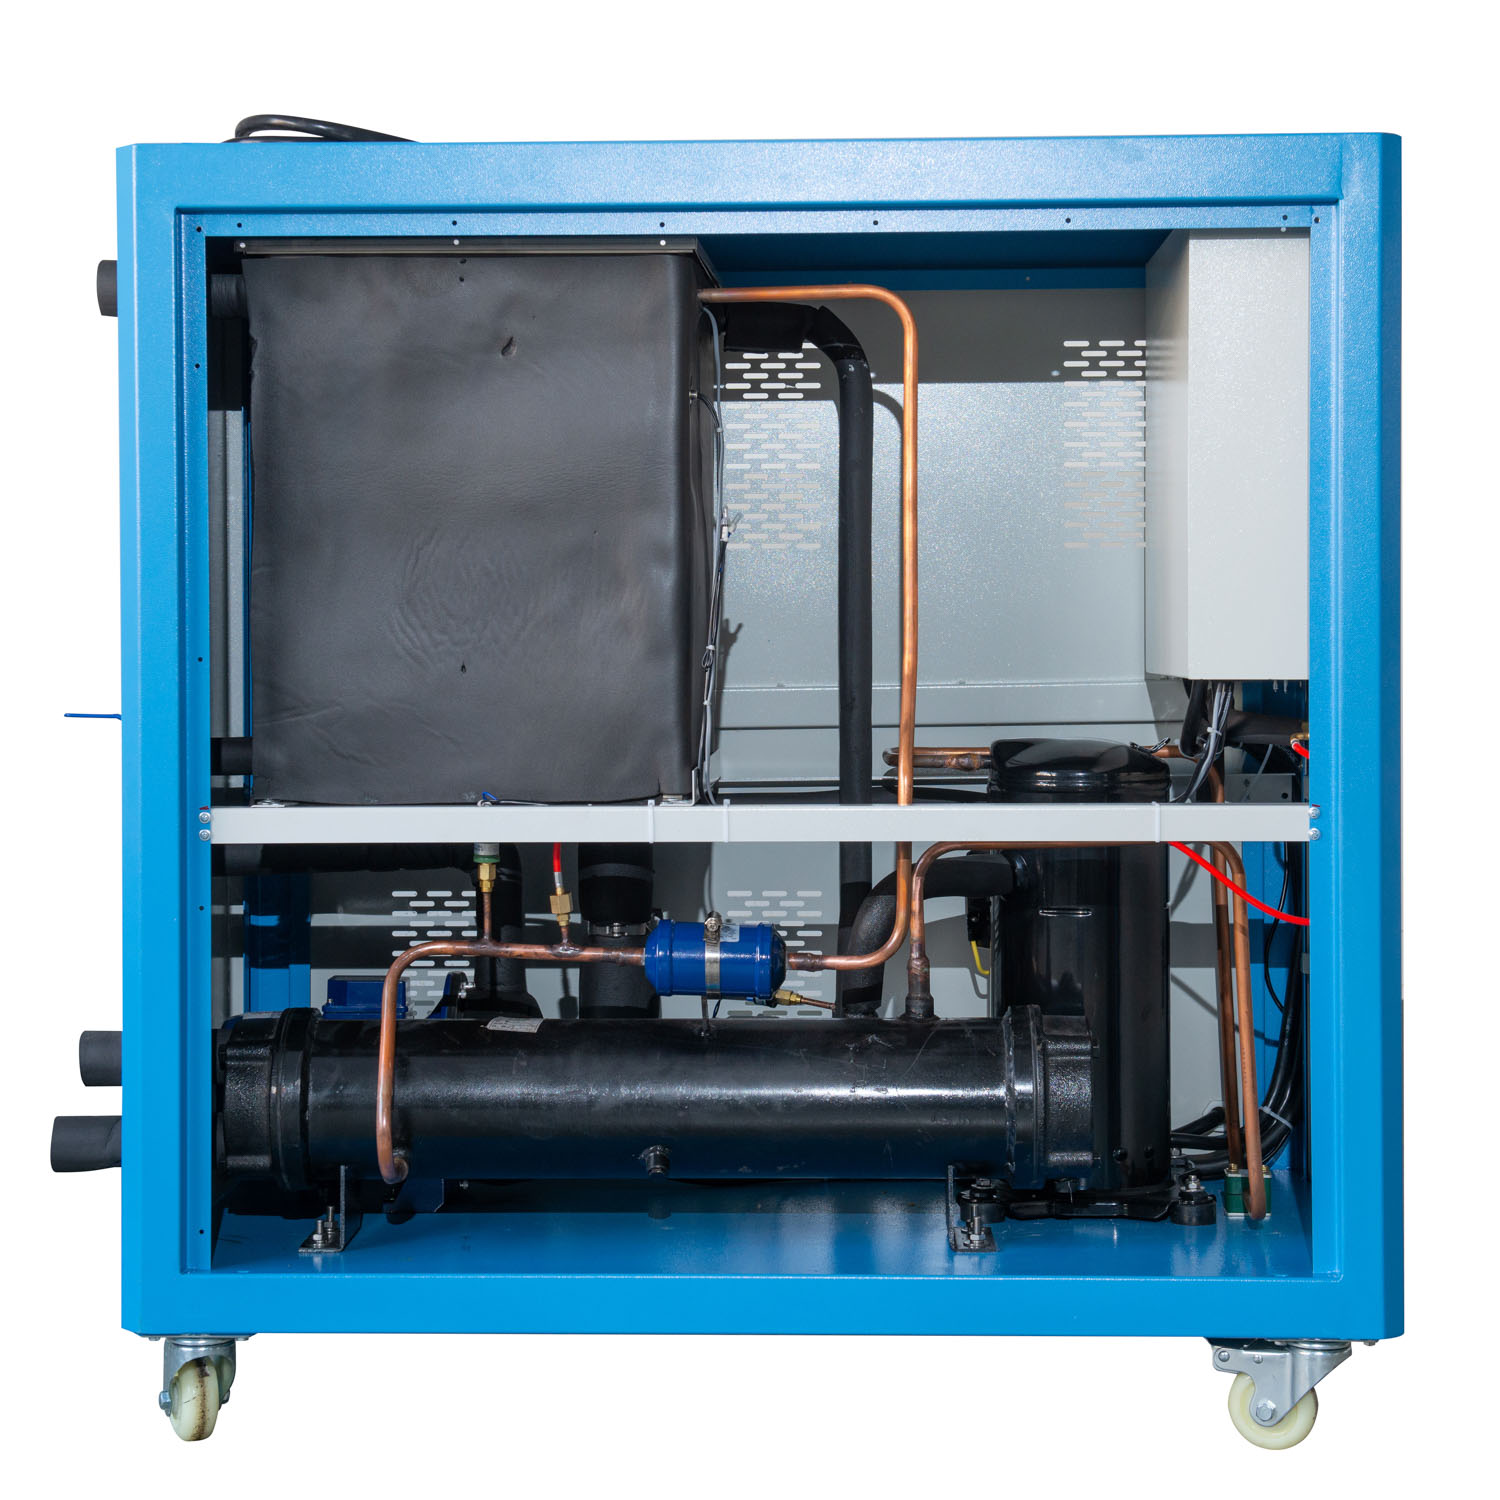 Ndetated High Efficiency Customizable Water Cooled Industrial Chiller 